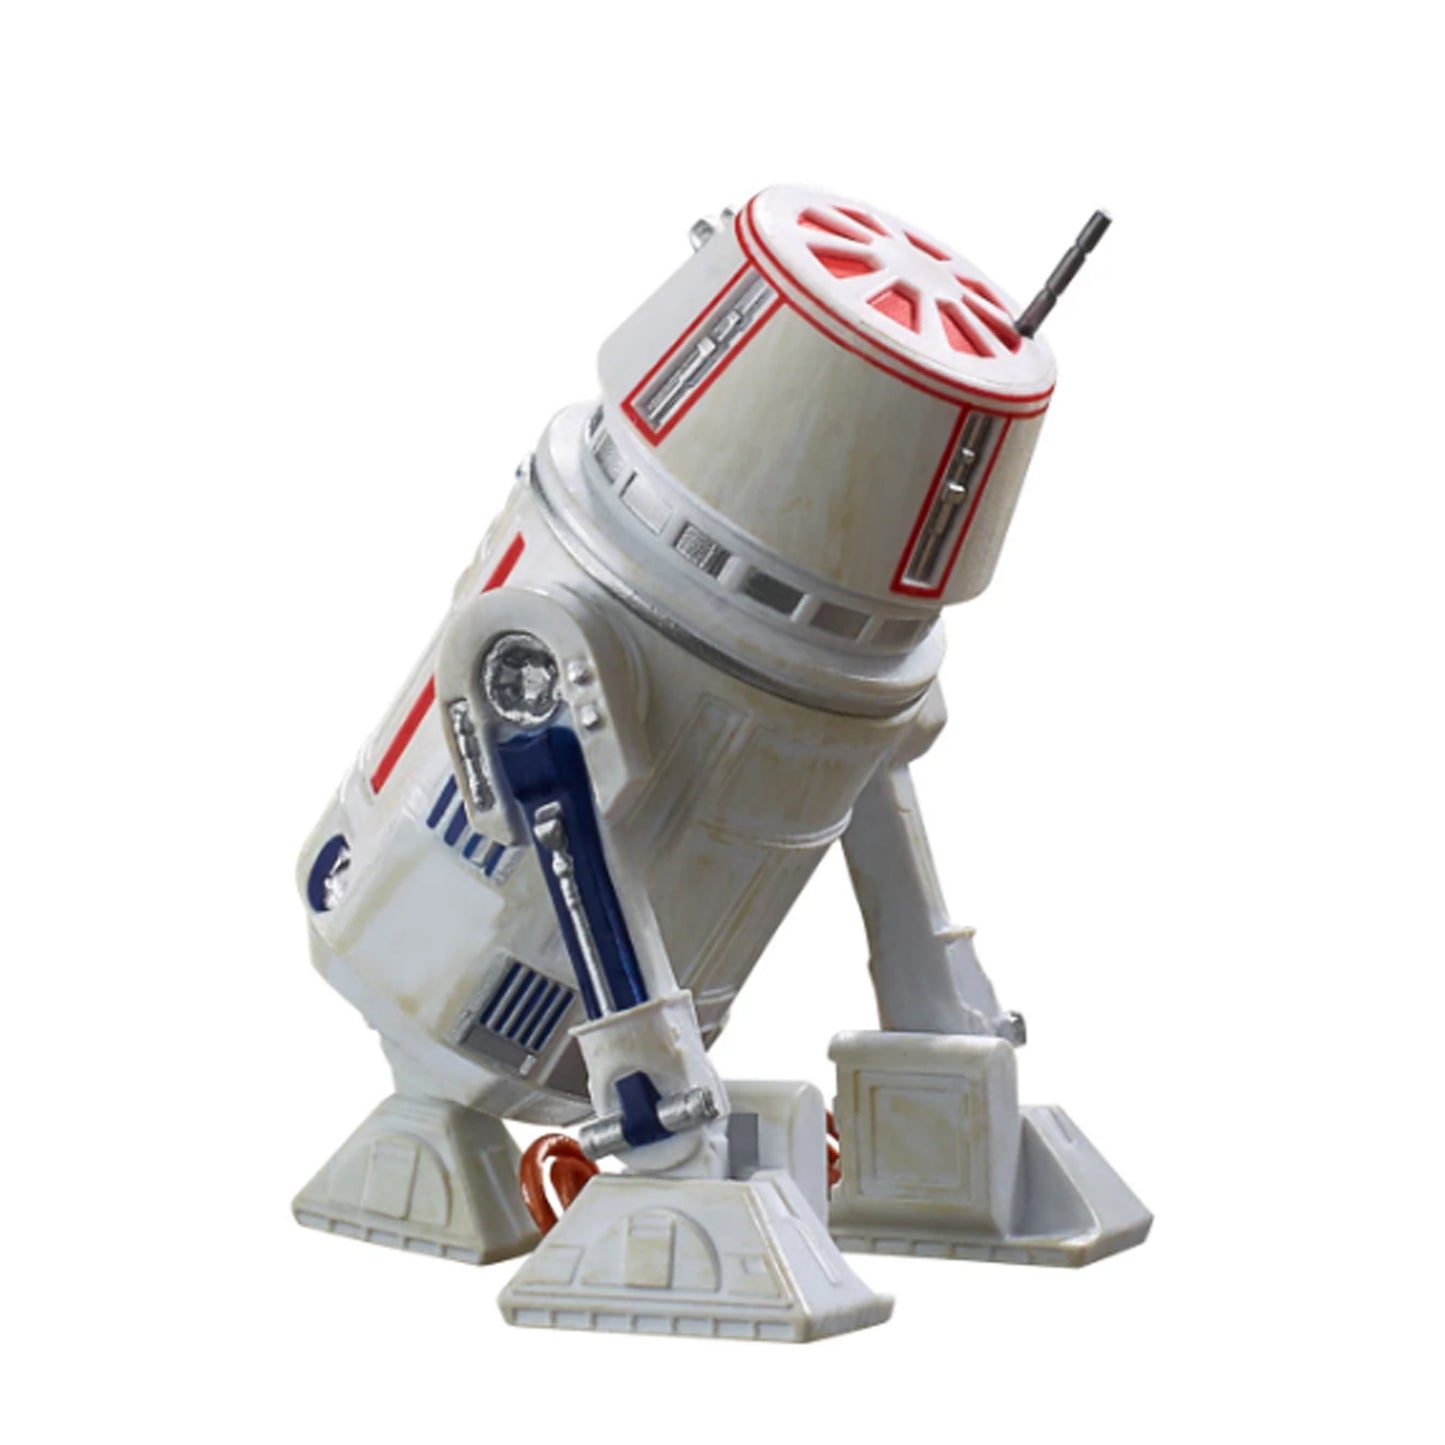 Star Wars The Vintage Collection (The Mandalorian) R5-D4